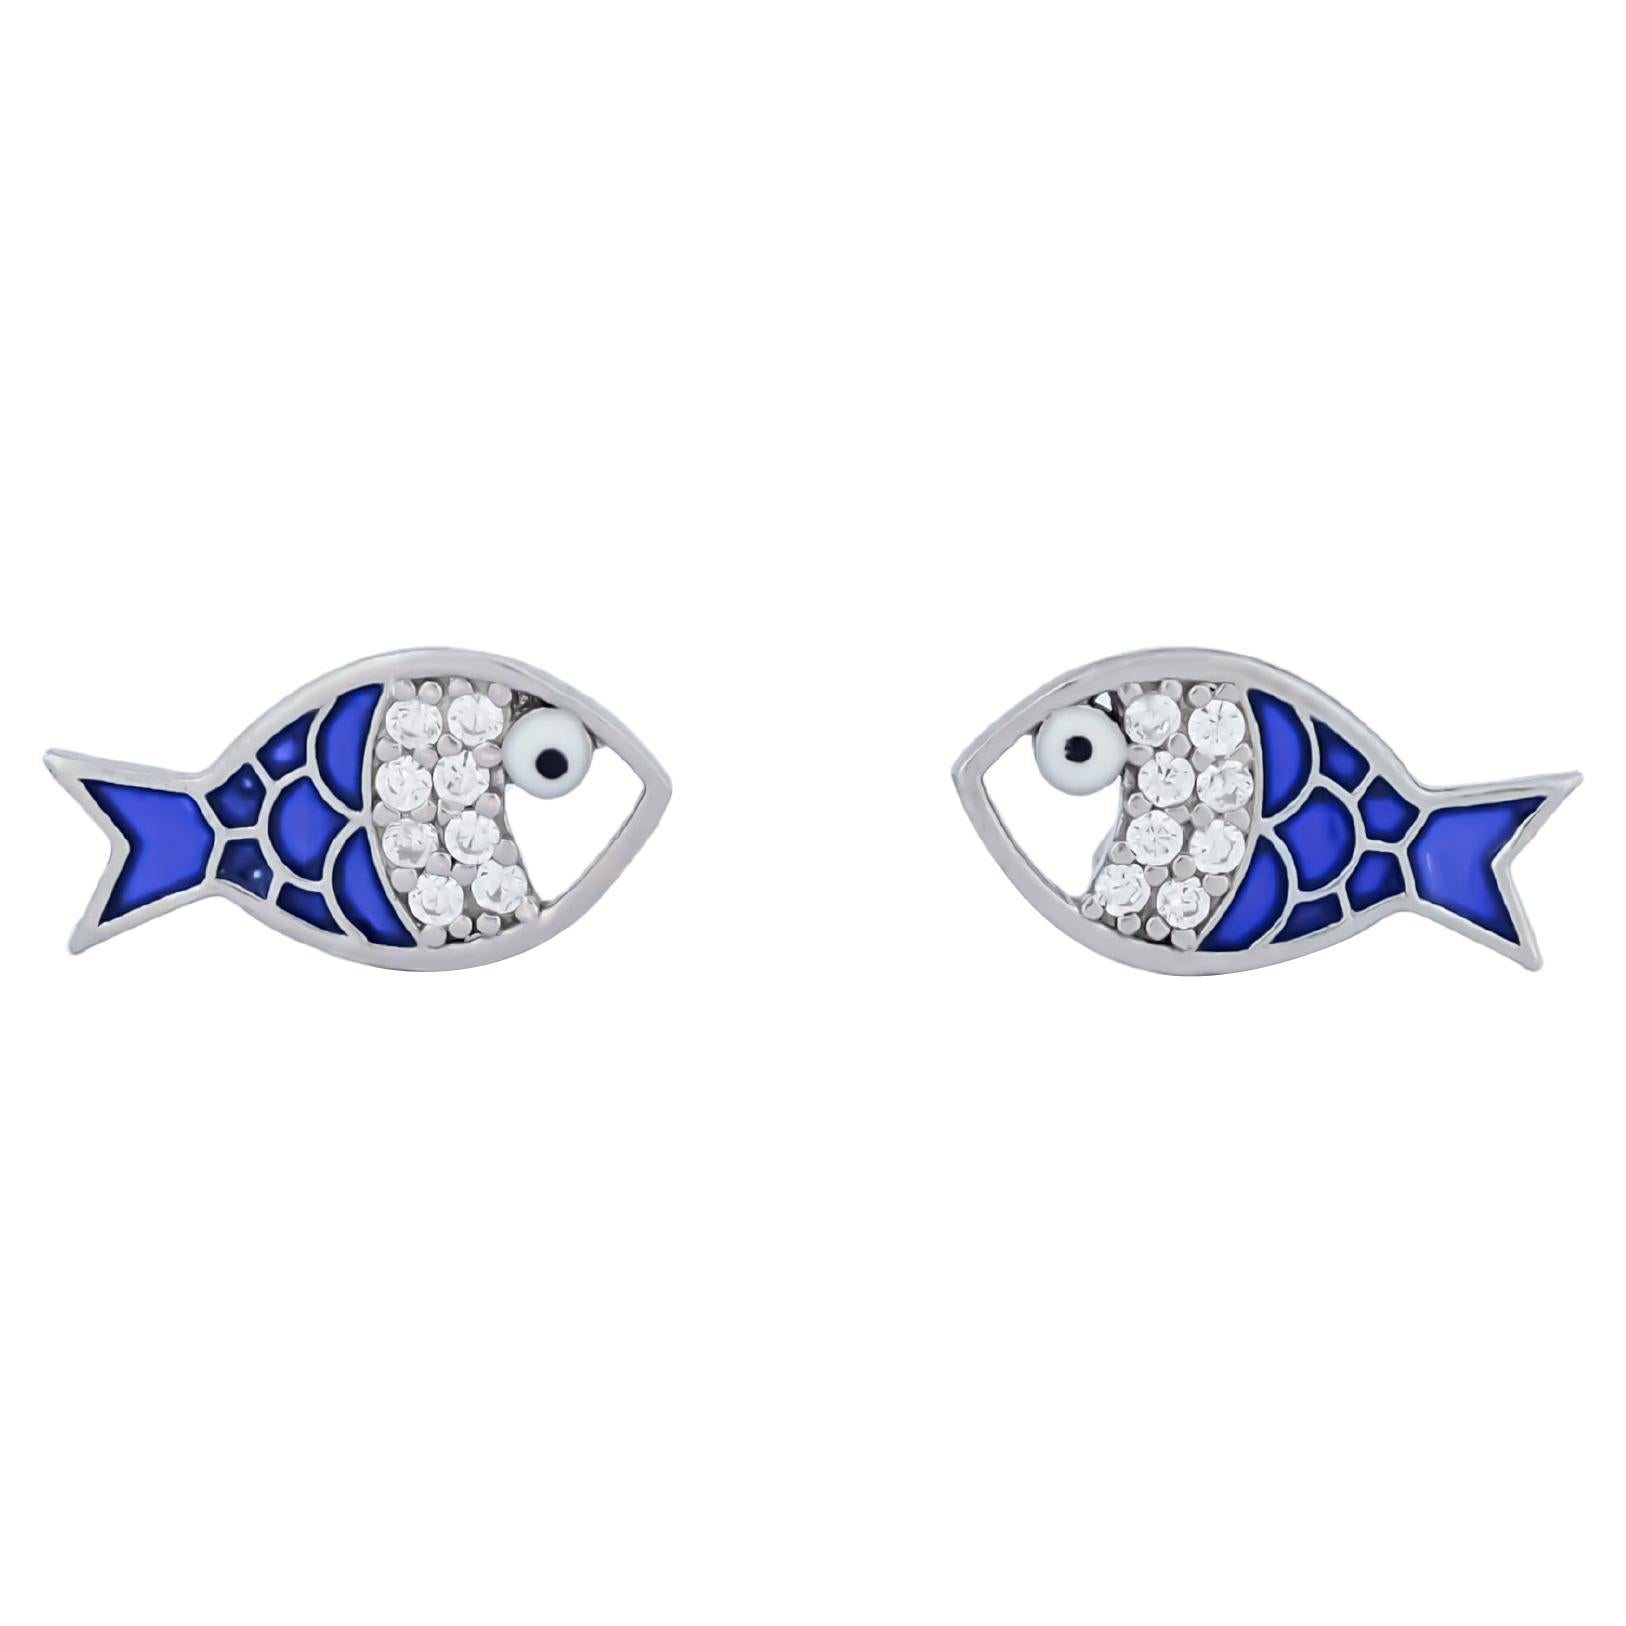 Fish earrings with moissanites and blue enamel in 14k gold. For Sale